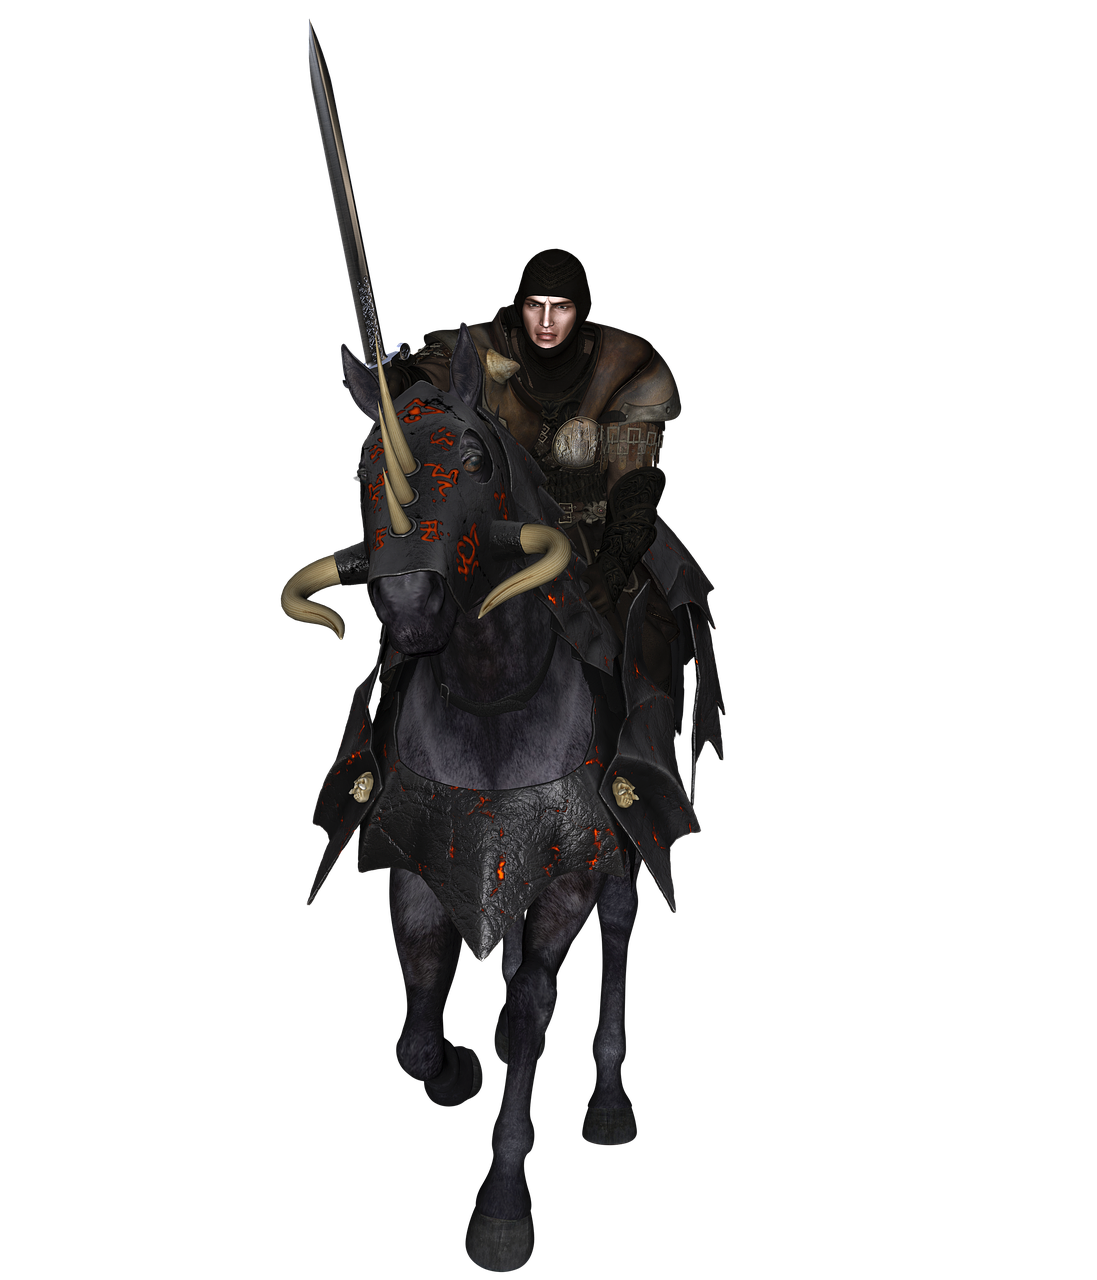 a man riding on the back of a black horse, inspired by Hans Bol, polycount contest winner, renaissance, richard iv the roman king photo, very dark background, wielding a spear, 2 d render